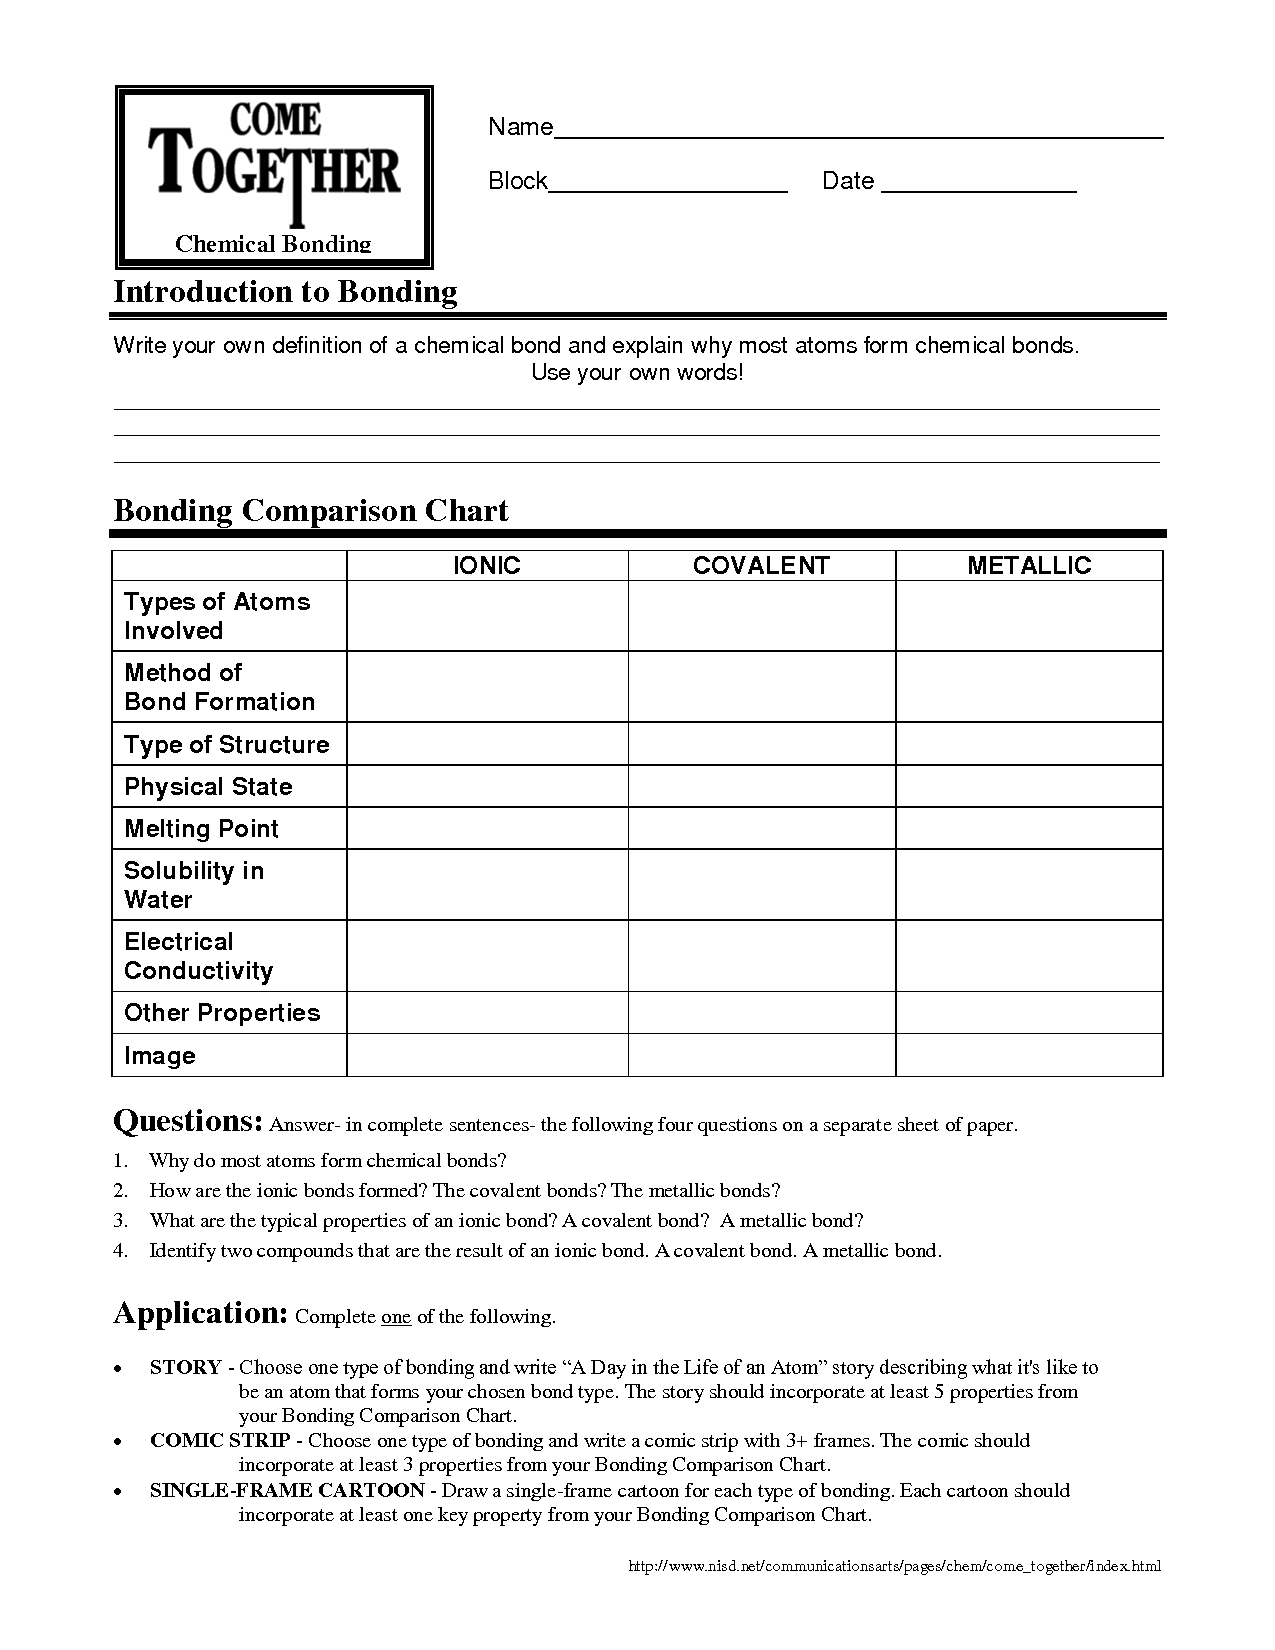 16 Best Images of Types Of Chemical Bonds Worksheet Answers  Chemical Bonding Worksheet Answer 